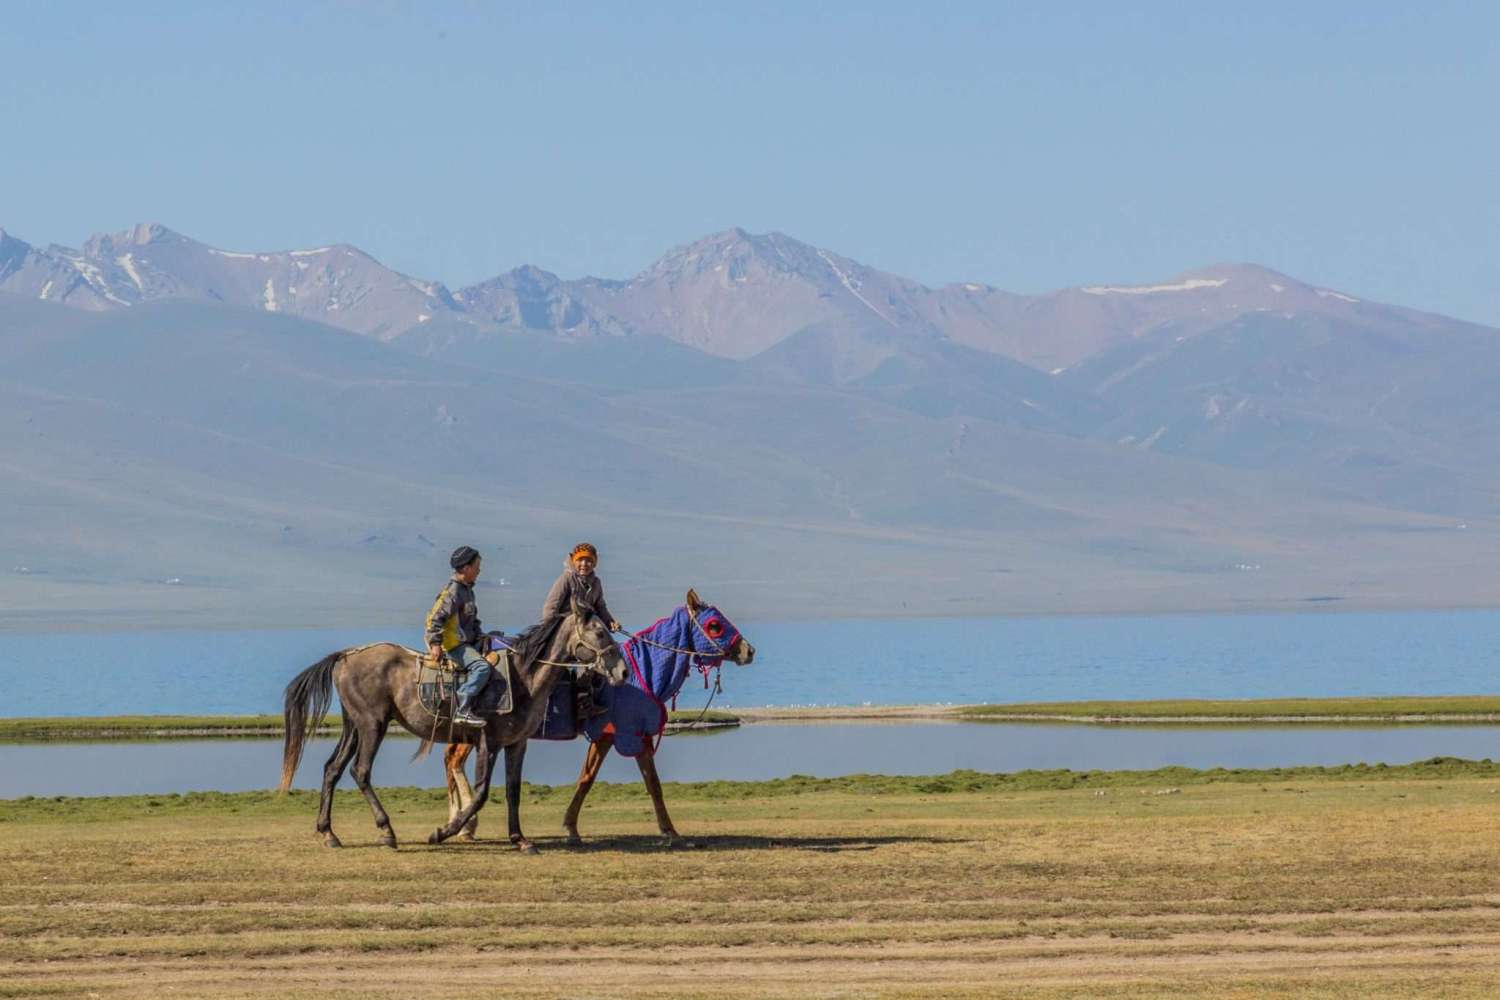 Son Kul Lake - Lakeside Rides In Kyrgyzstan - Nomadic Trails of Central Asia